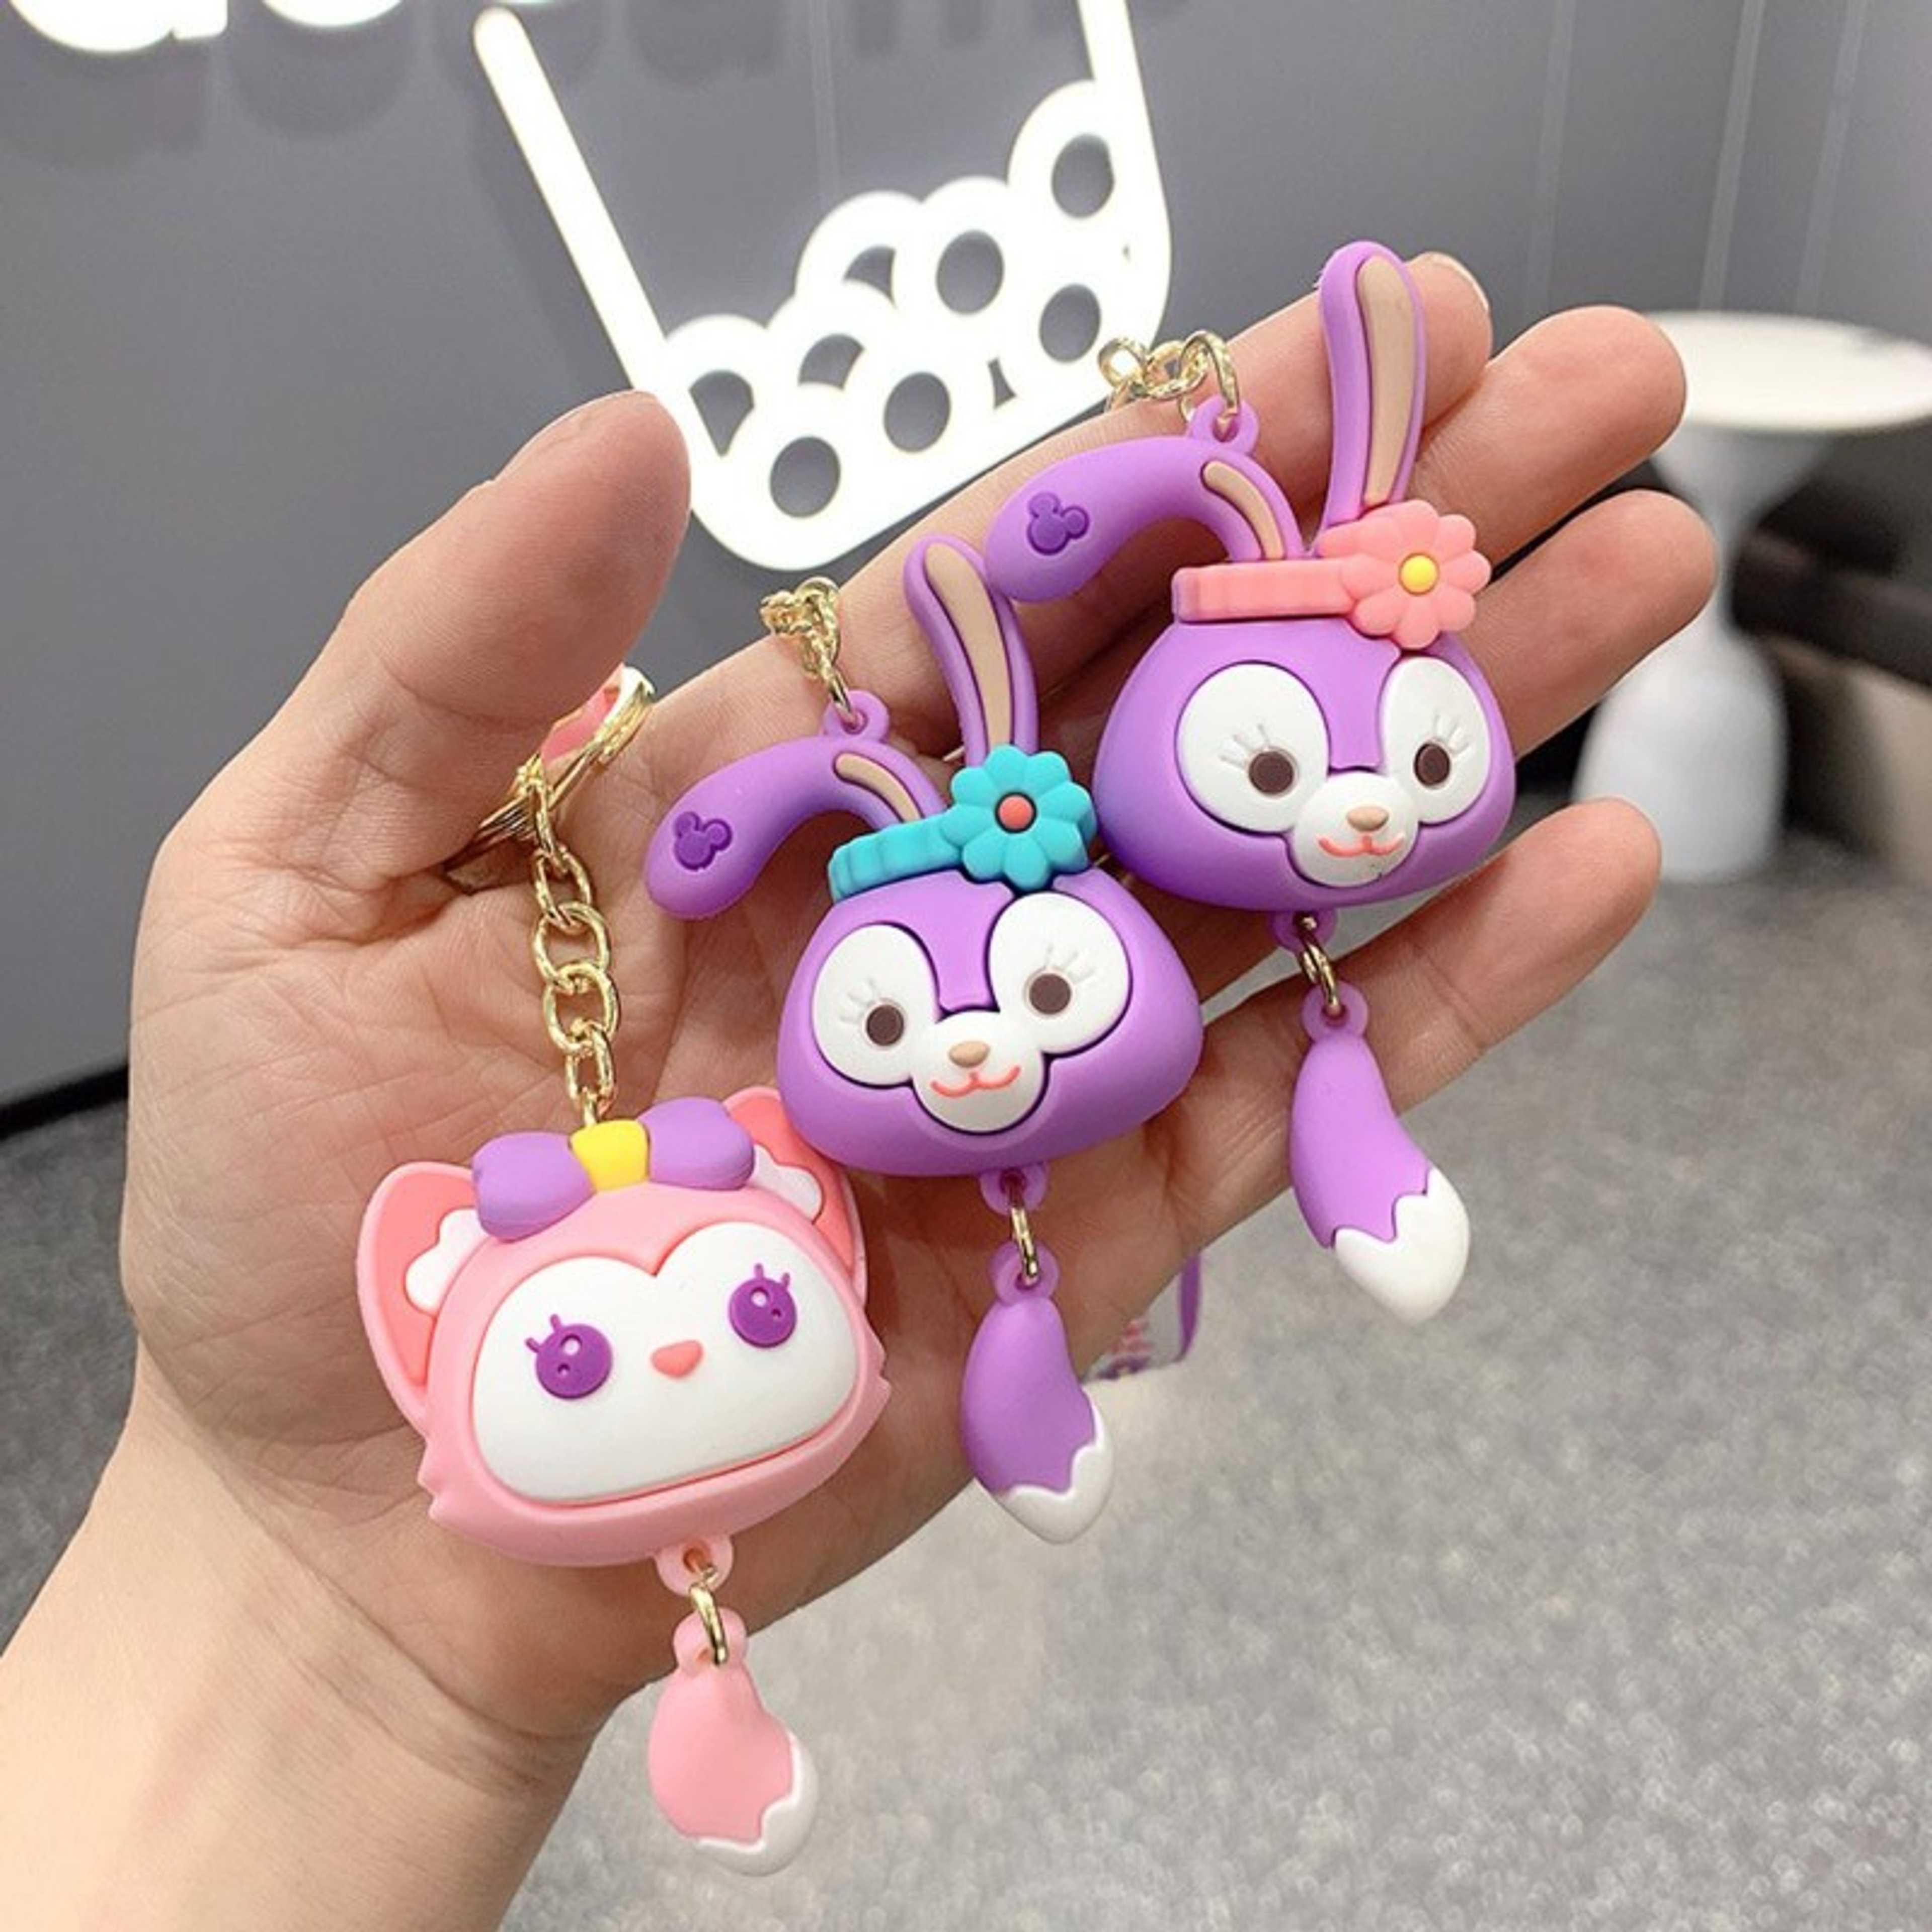 (1PCS) Hello kitty keychain (multiple variants) -keychains for girls cartoon character / action figure soft pvc keychain for kids (girls and boys) - bag hanging accessories / keyring